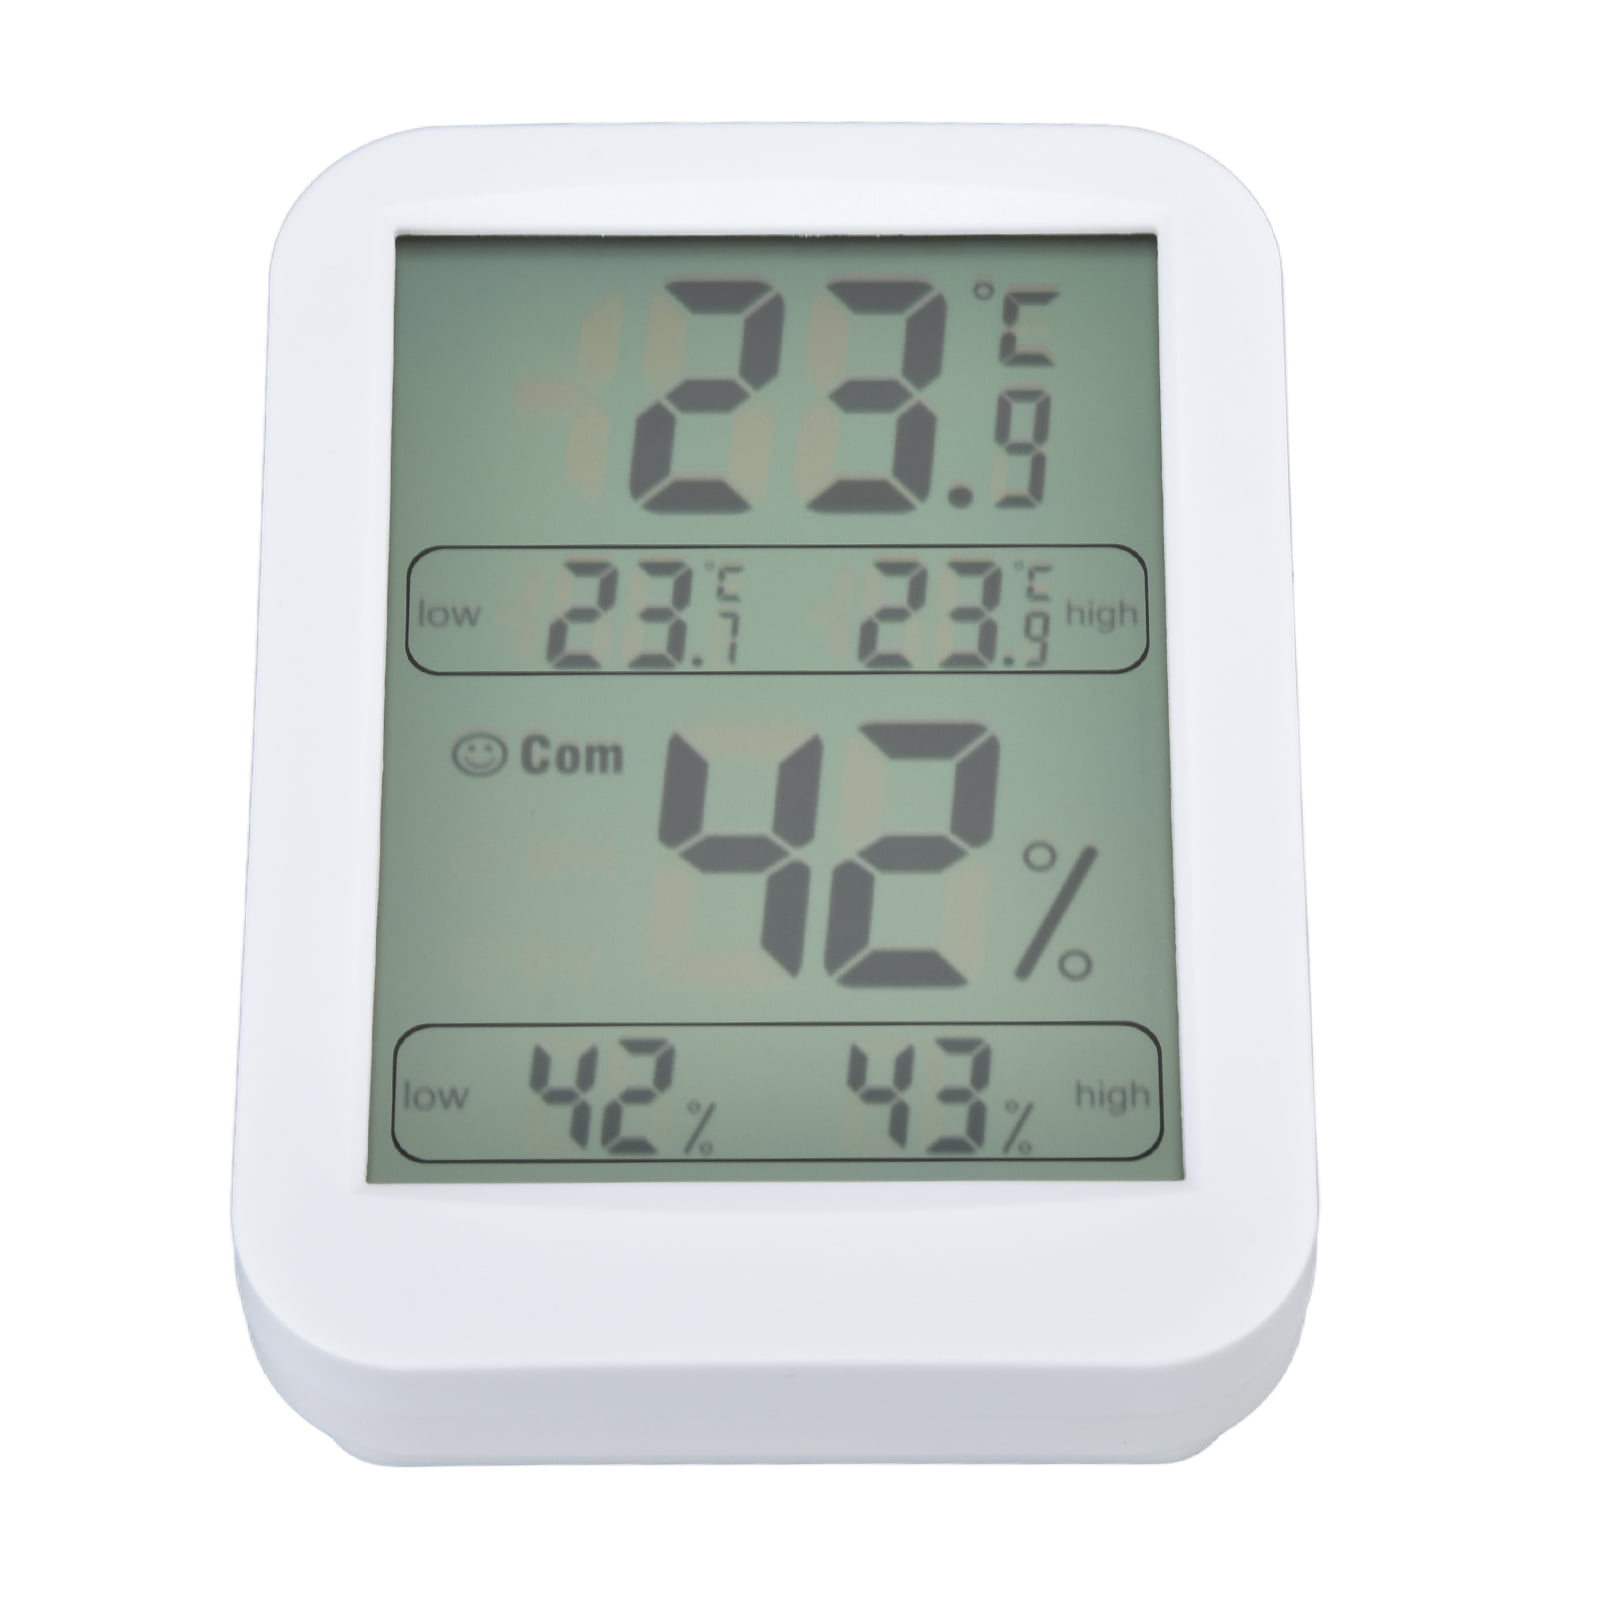 Tebru Humidity Meter For Greenhouse,Thermometer Hygrometer